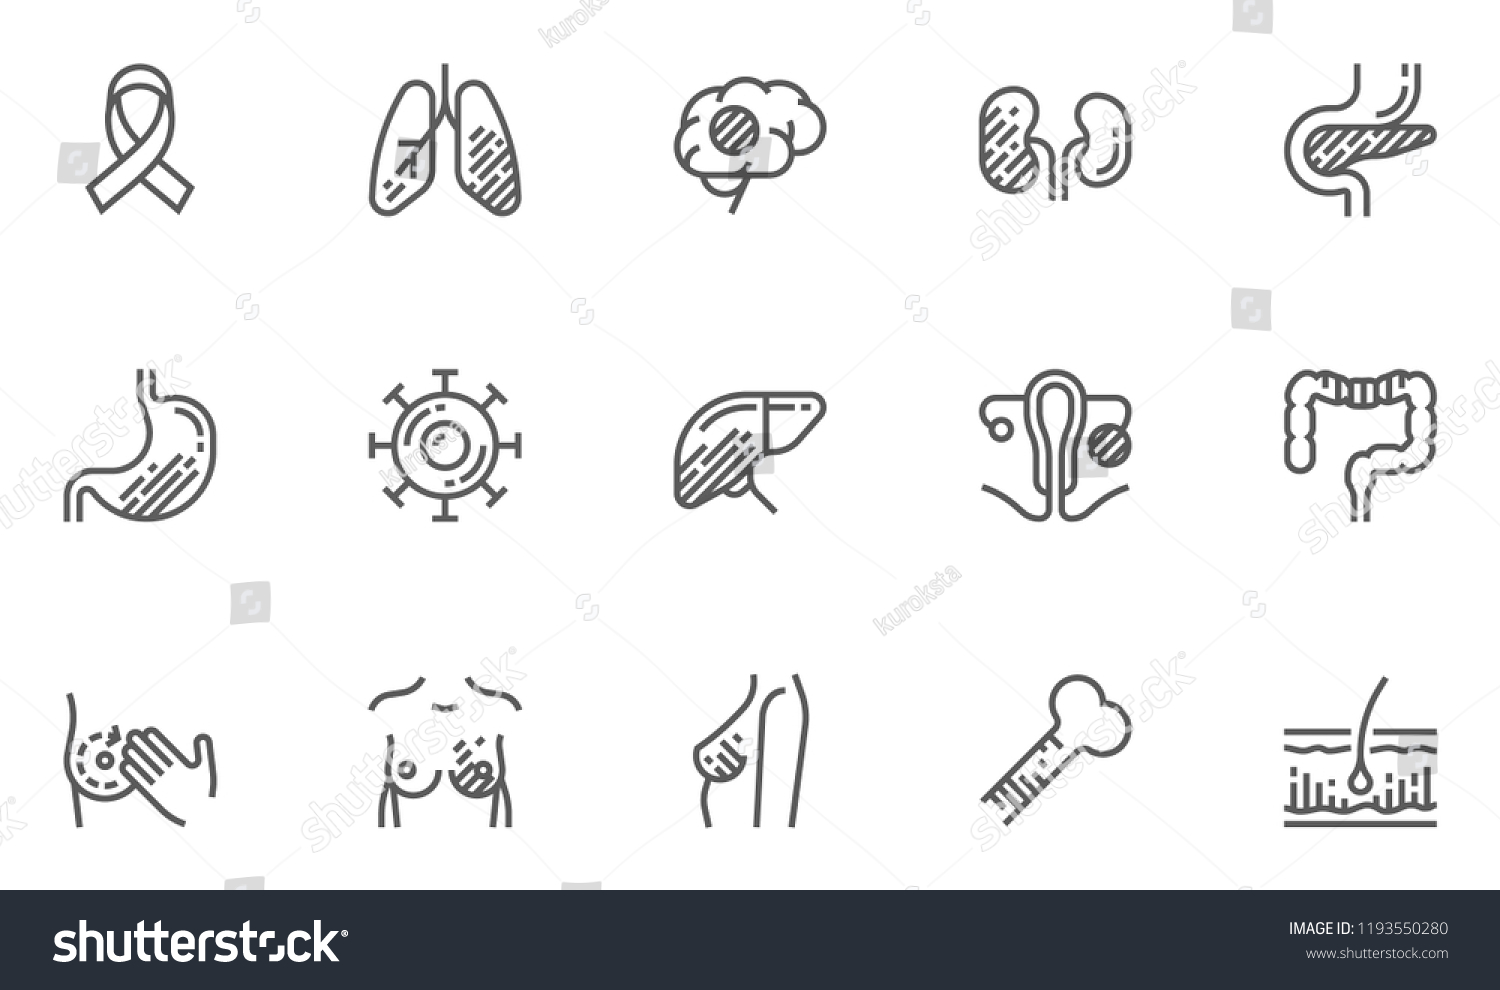 Cancer, Malignant Tumor. Vector Line Icons Set. Oncology, Mammary Gland Cancer, Brain Tumor. Editable Stroke. 48x48 Pixel Perfect. #1193550280